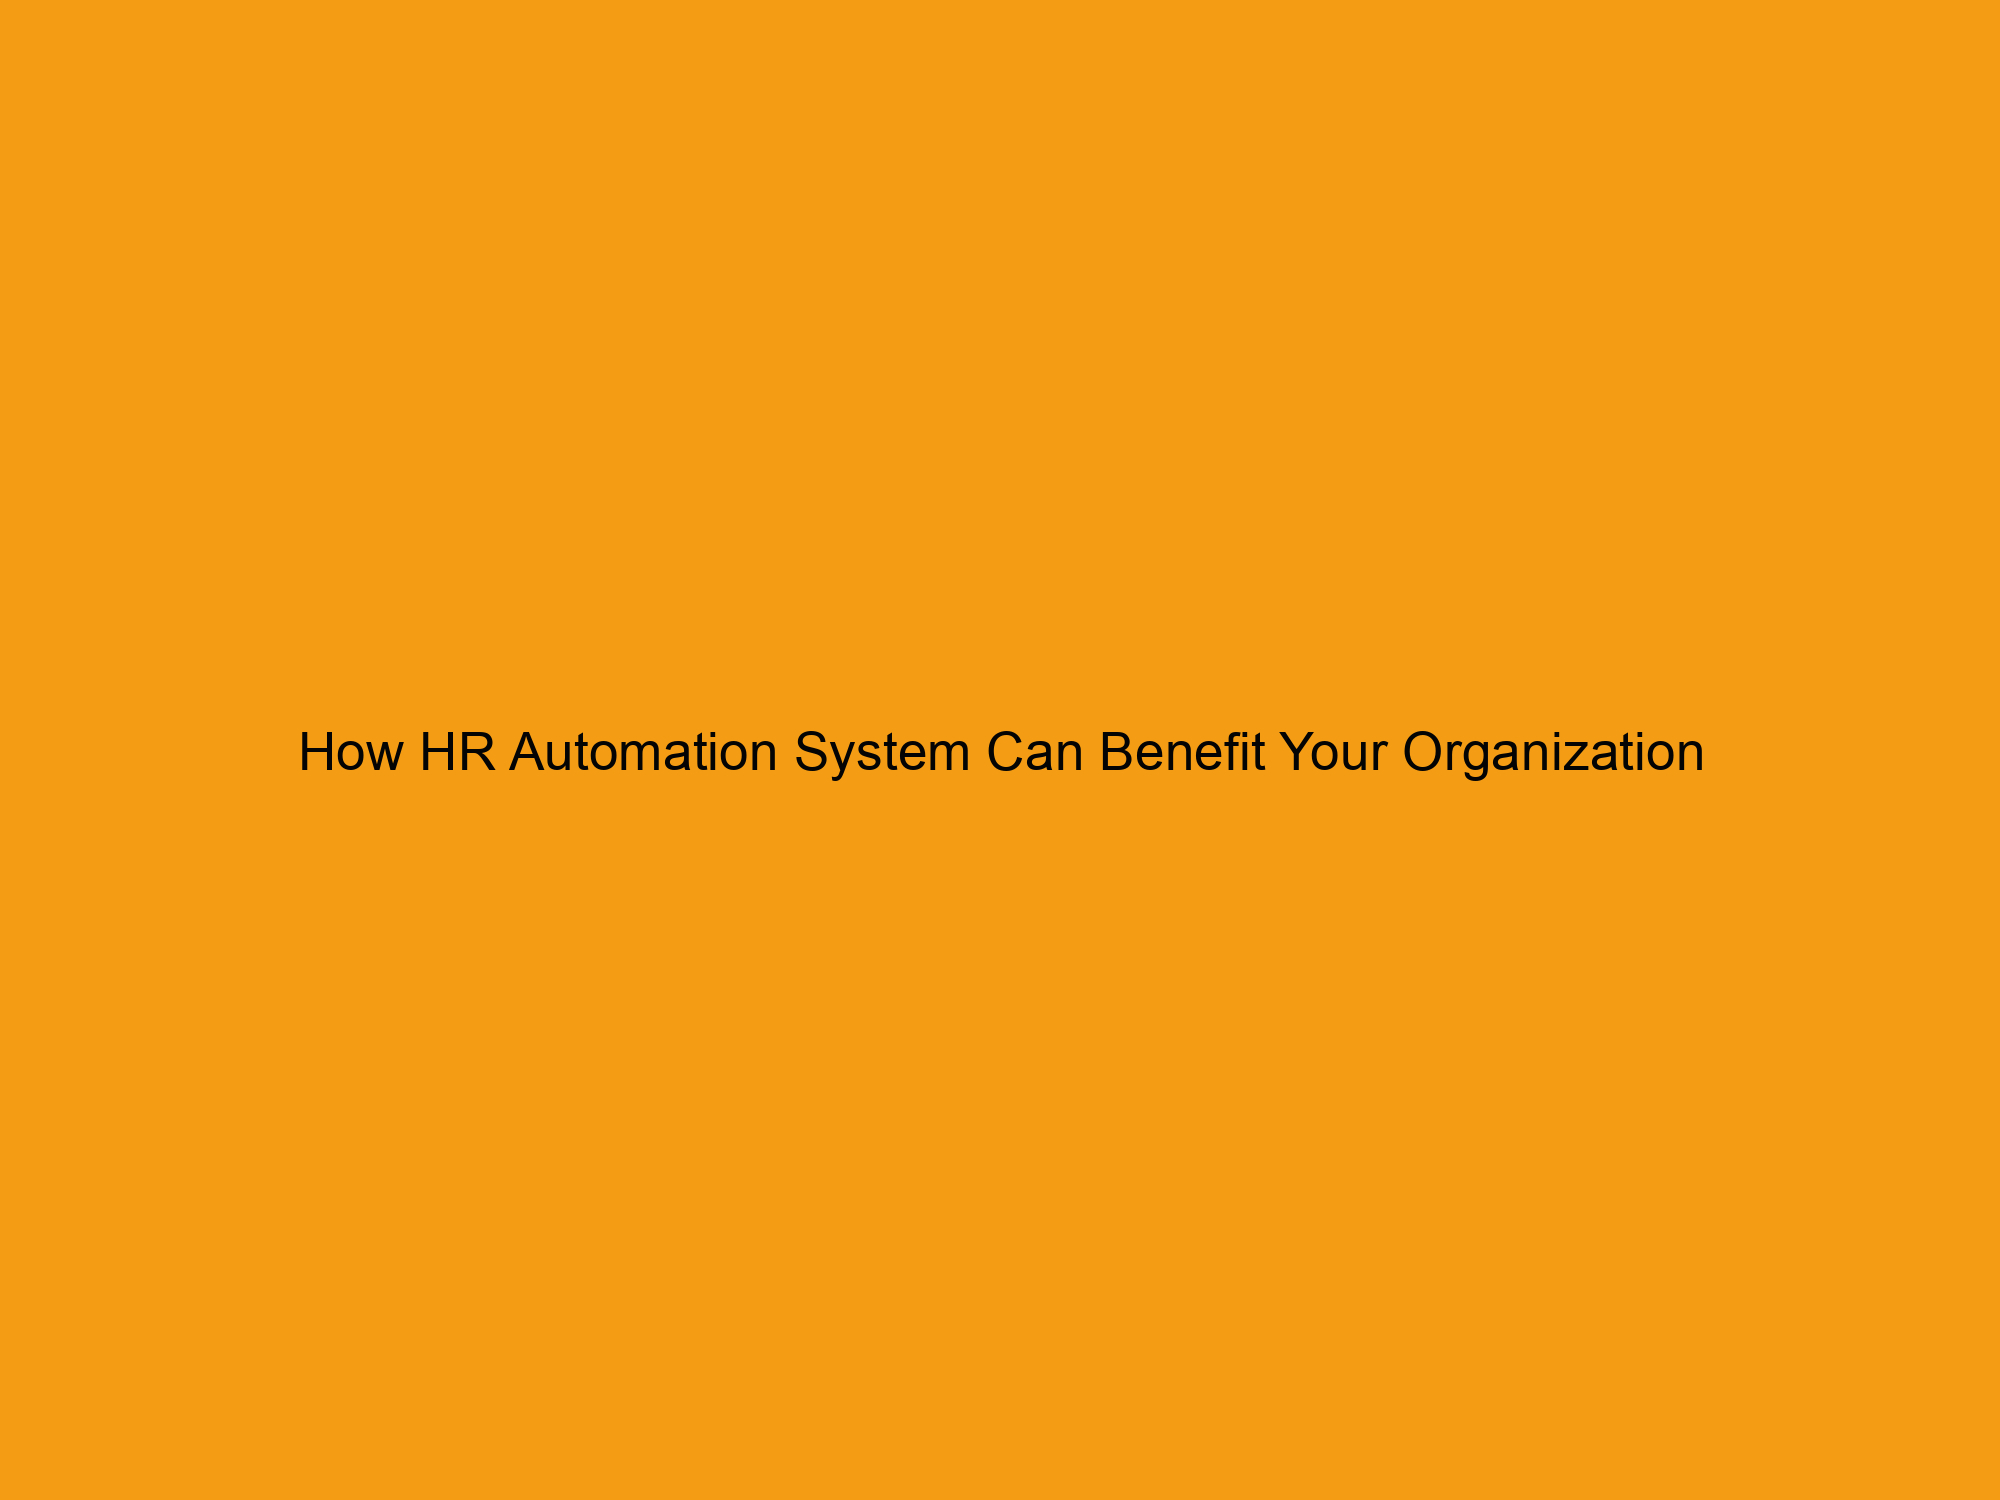 How HR Automation System Can Benefit Your Organization